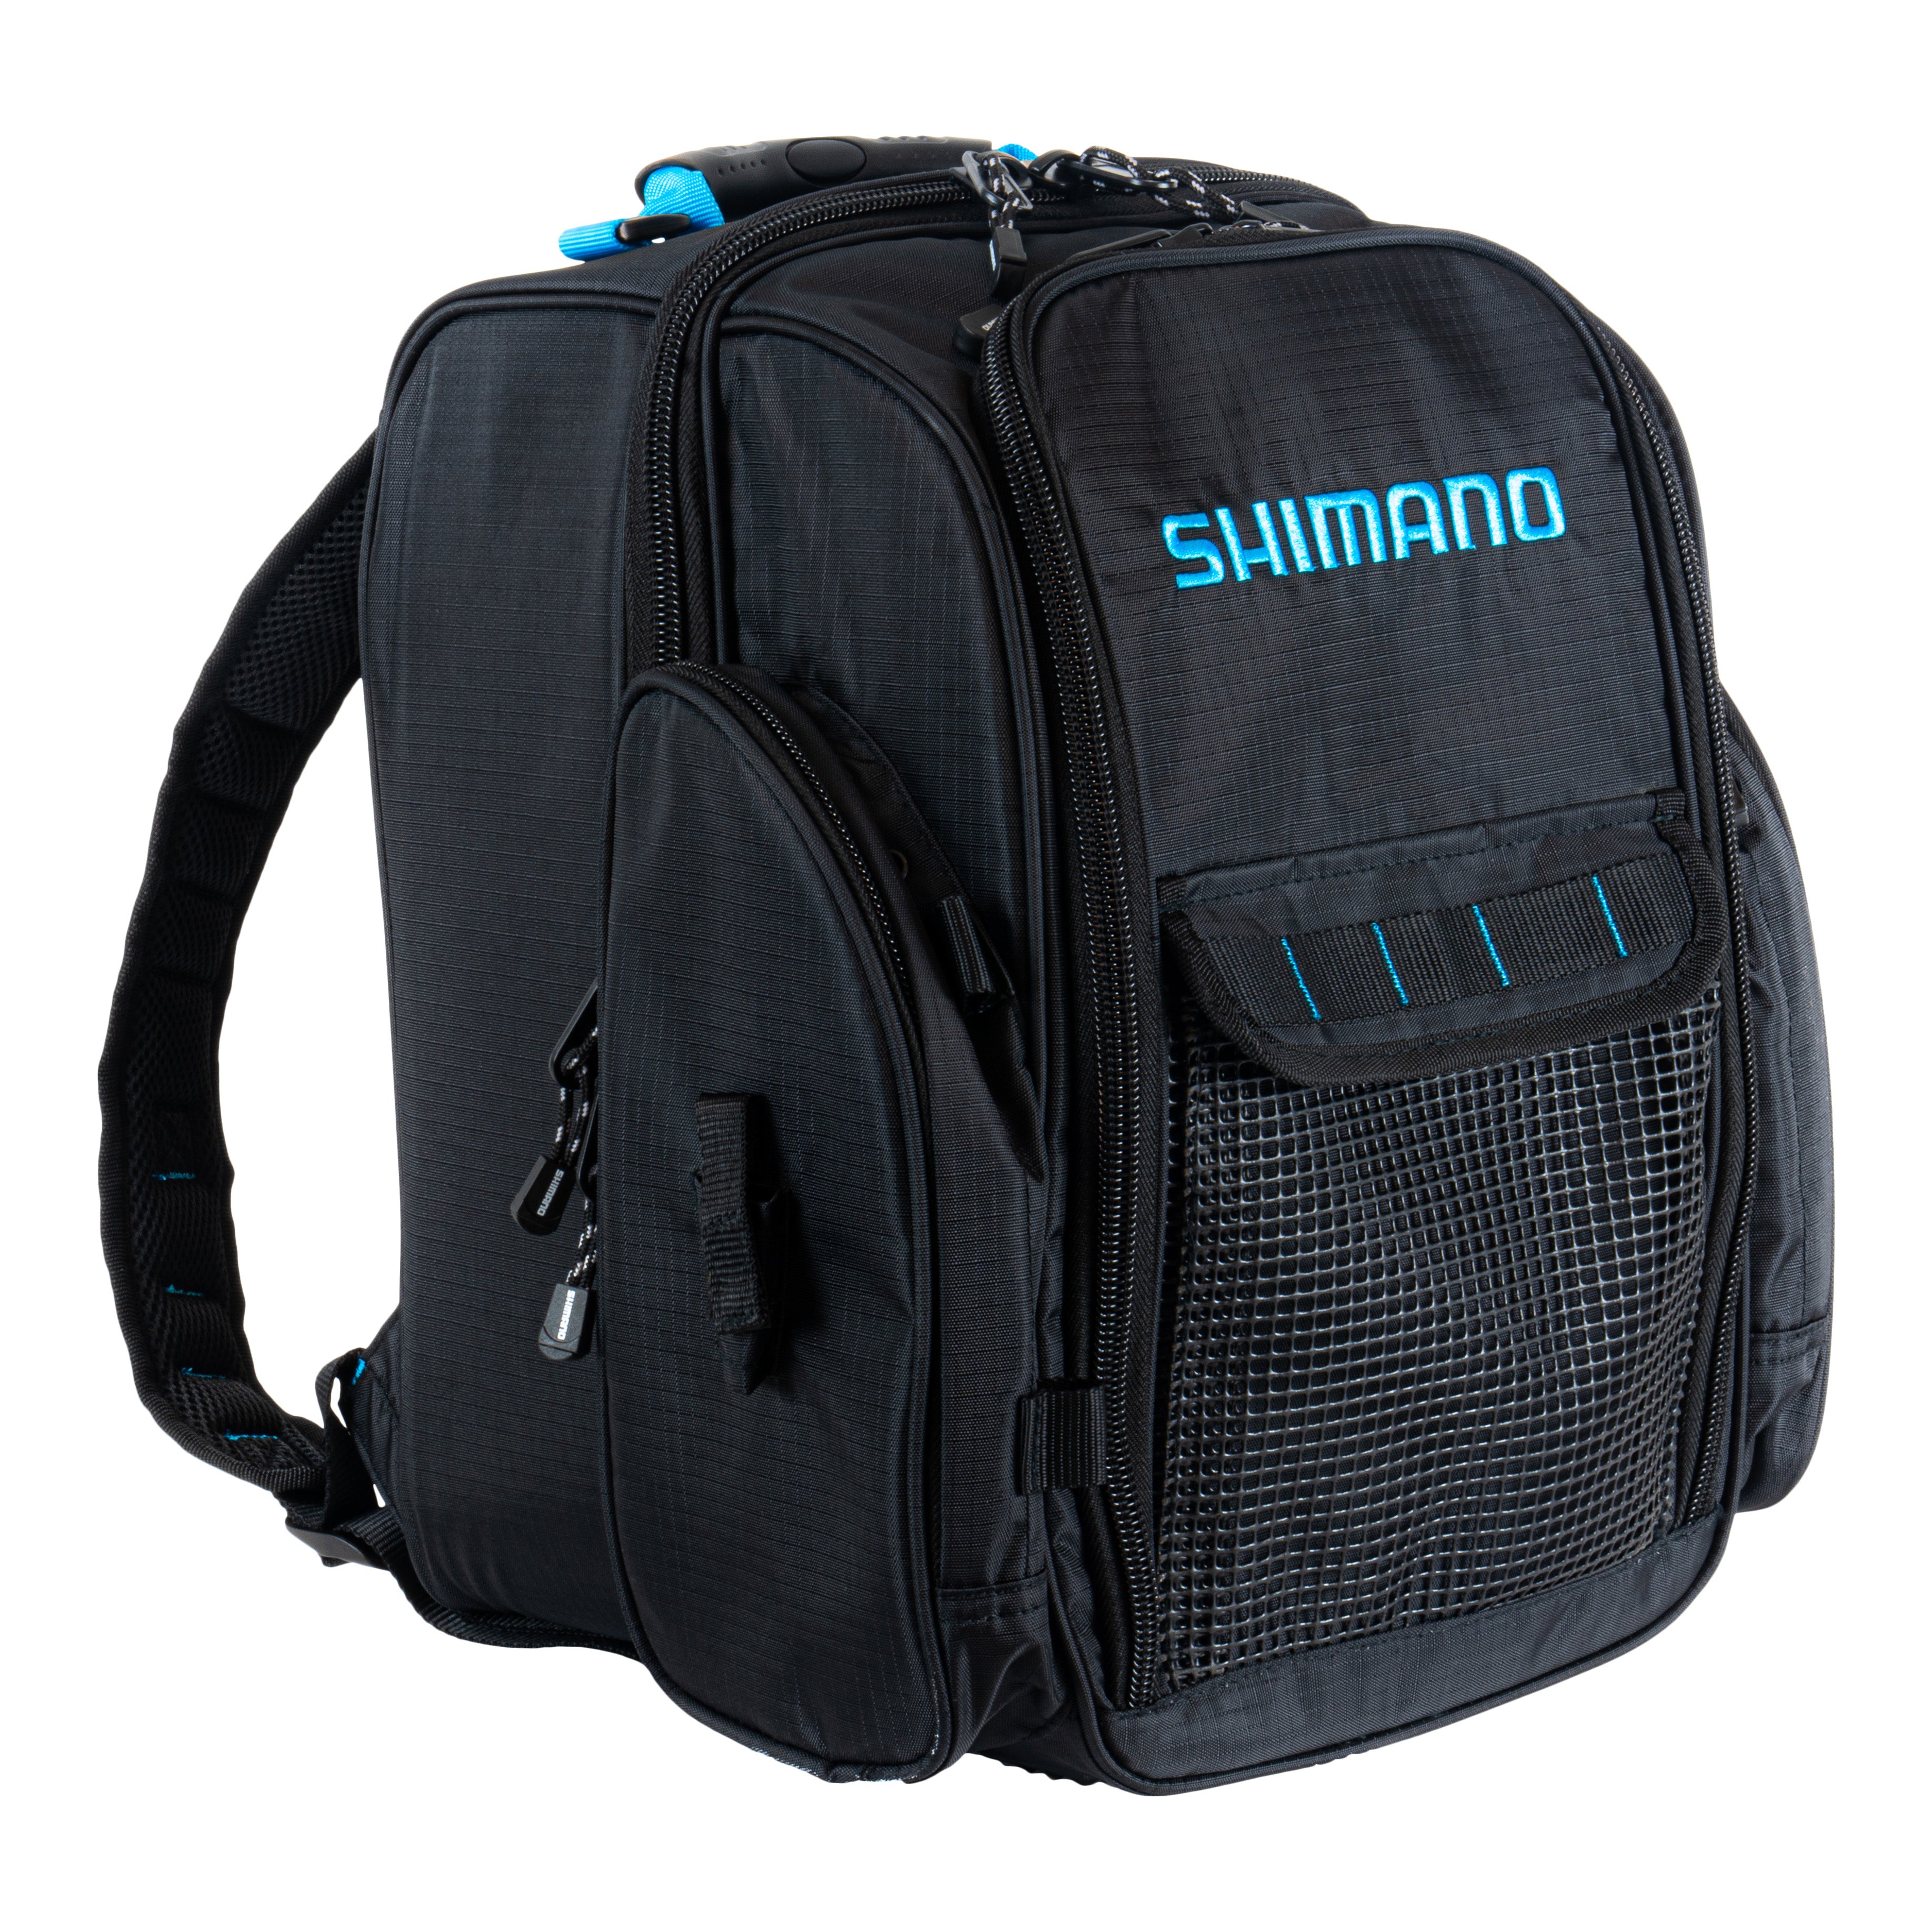 Shimano fishing tackle backpack - sporting goods - by owner - sale -  craigslist